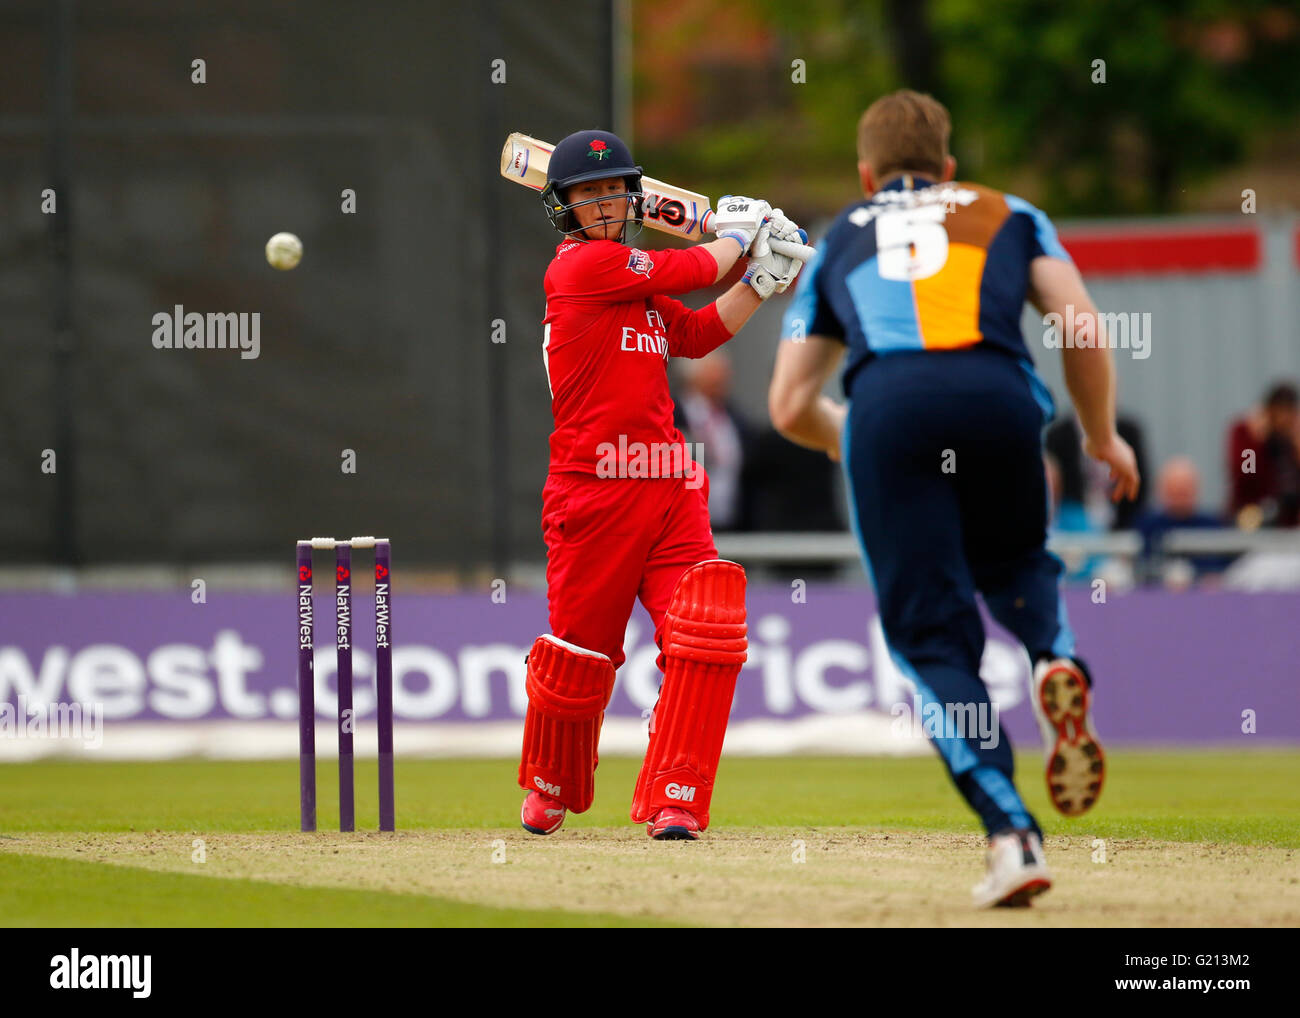 Old Trafford, Manchester, UK. 21st May, 2016. Natwest T20 Blast. Lancashire Lightning versus Derbyshire Falcons. Lancashire Lightning wicket keeper Alex Davies hits Derbyshire Falcons all-rounder James Neesham to the boundary. The New Zealand test player is making his T20 debut today, having signed up for the 2016 T20 Blast season.? Credit:  Action Plus Sports/Alamy Live News Stock Photo